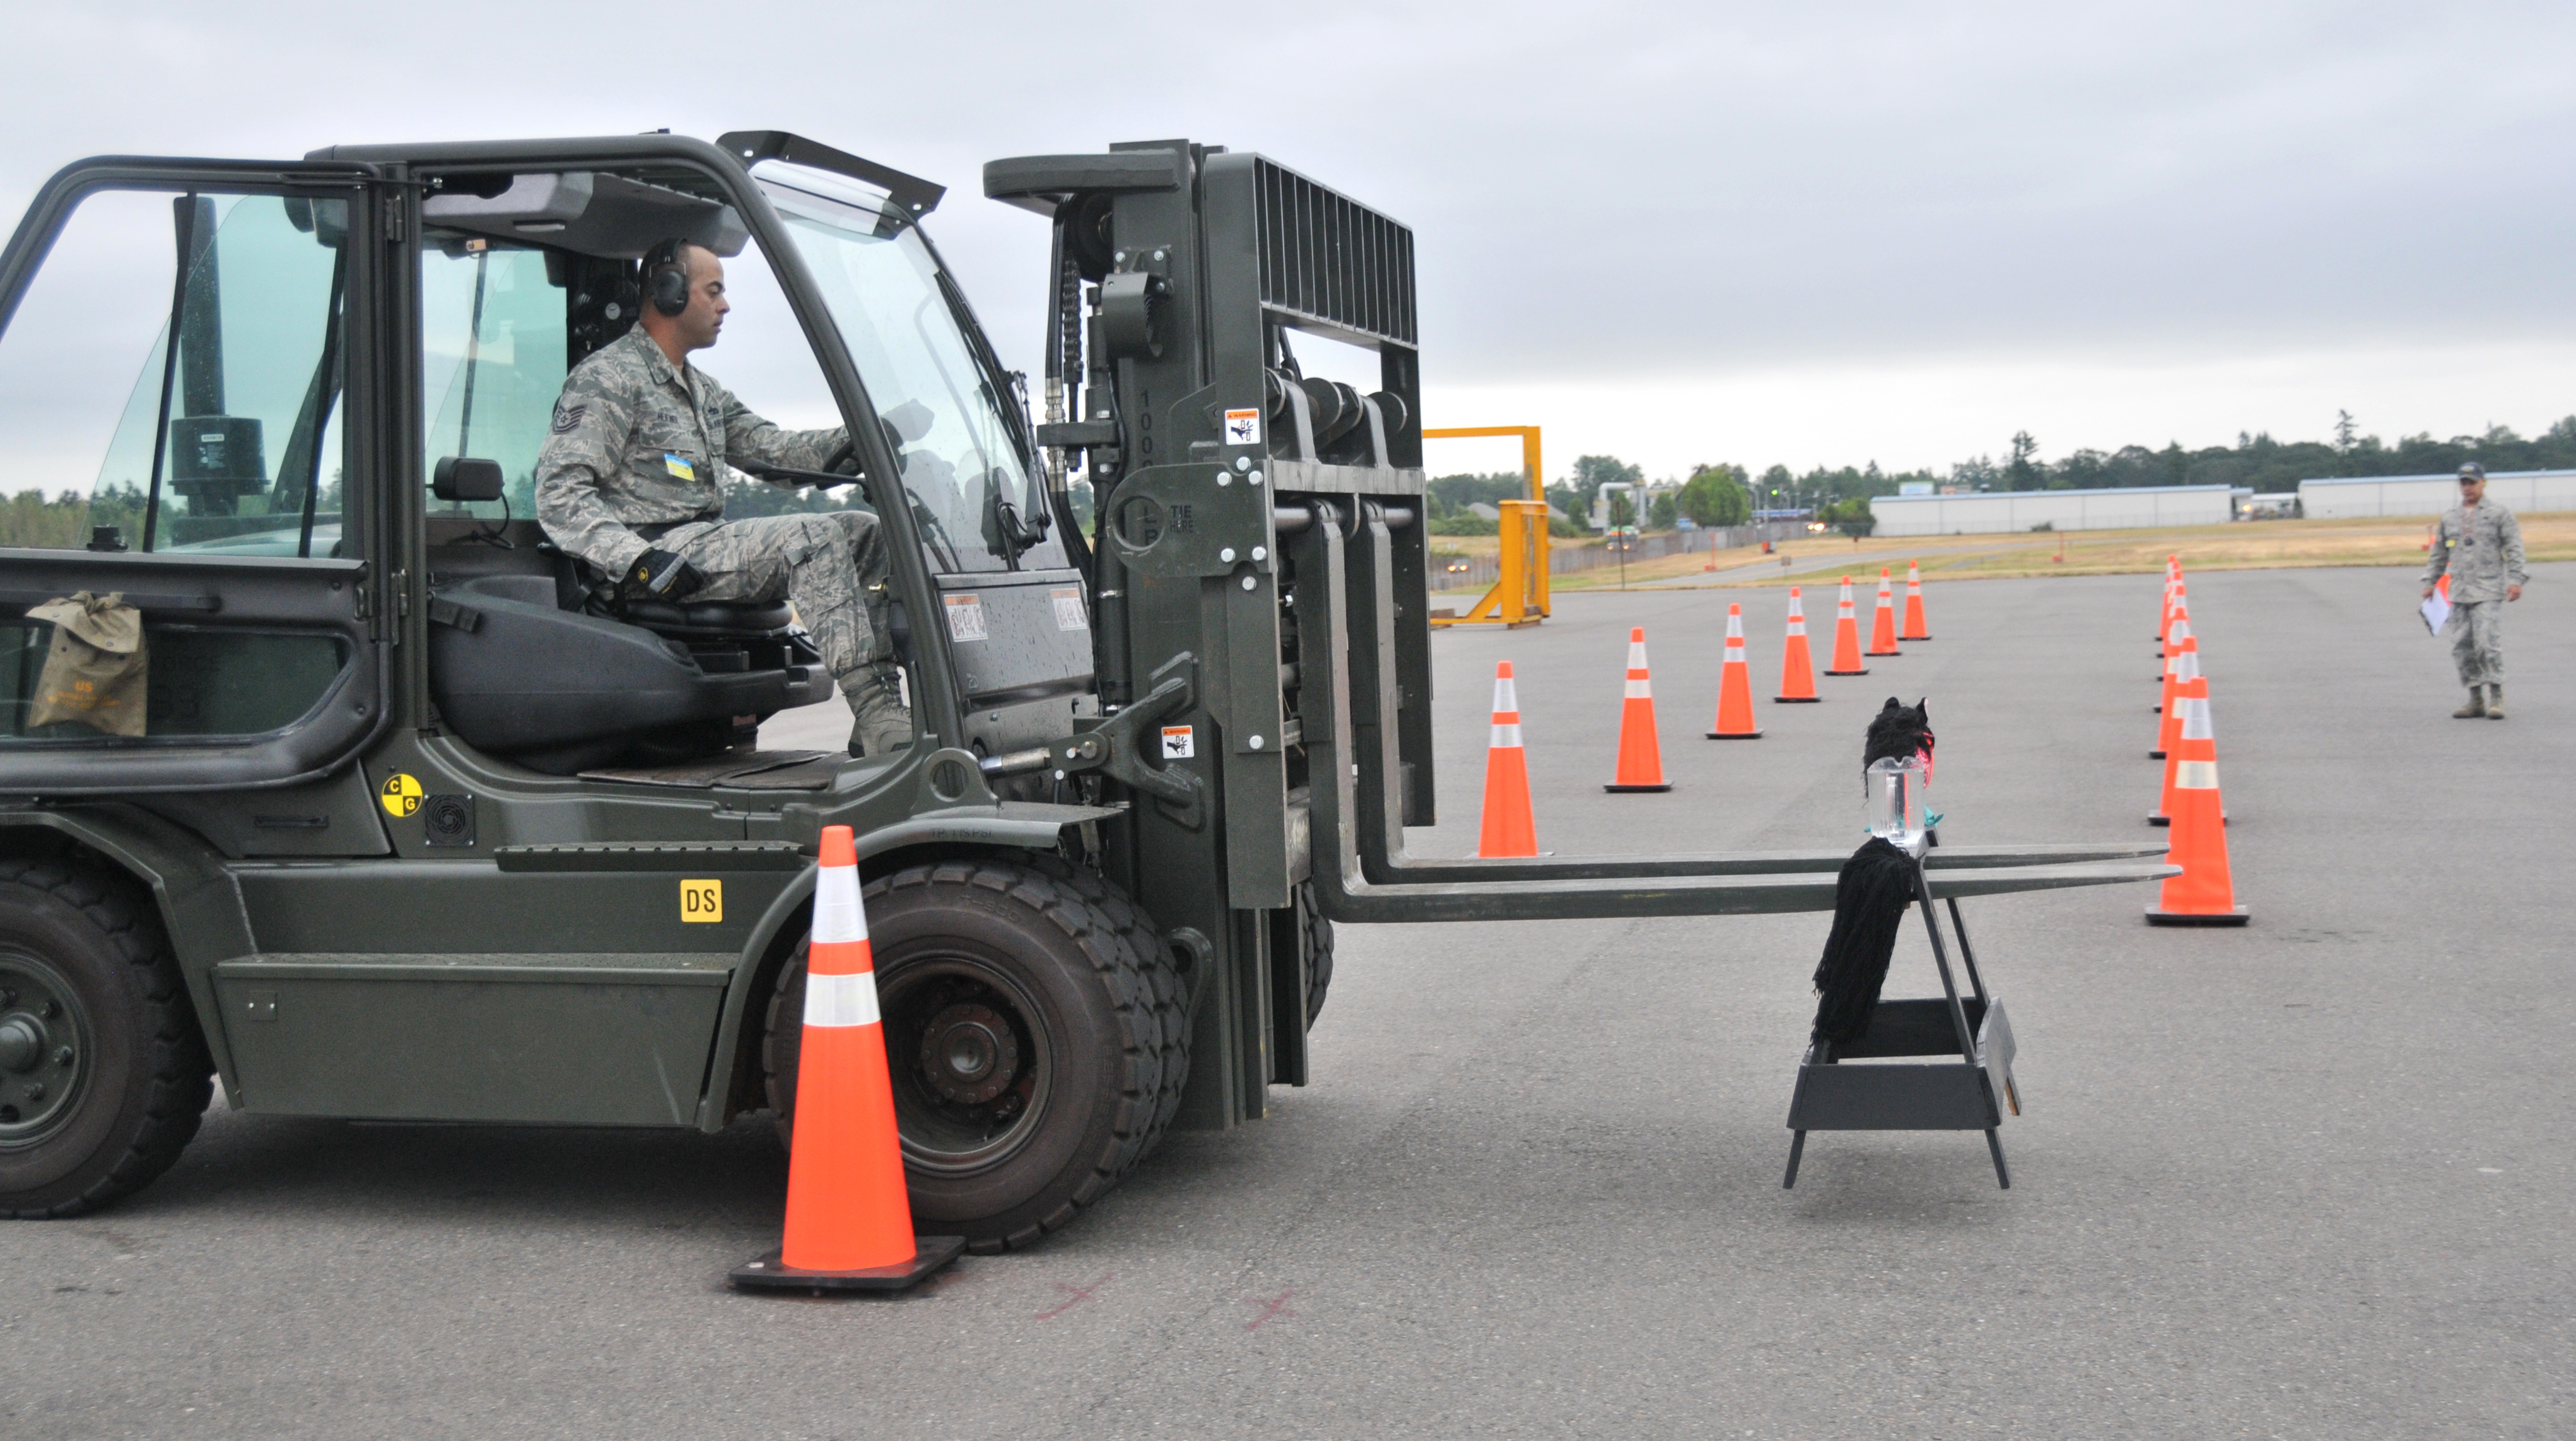 Aerial Porters Participate In Forklift Driving Course For Rodeo 2011 U S Air Force Article Display